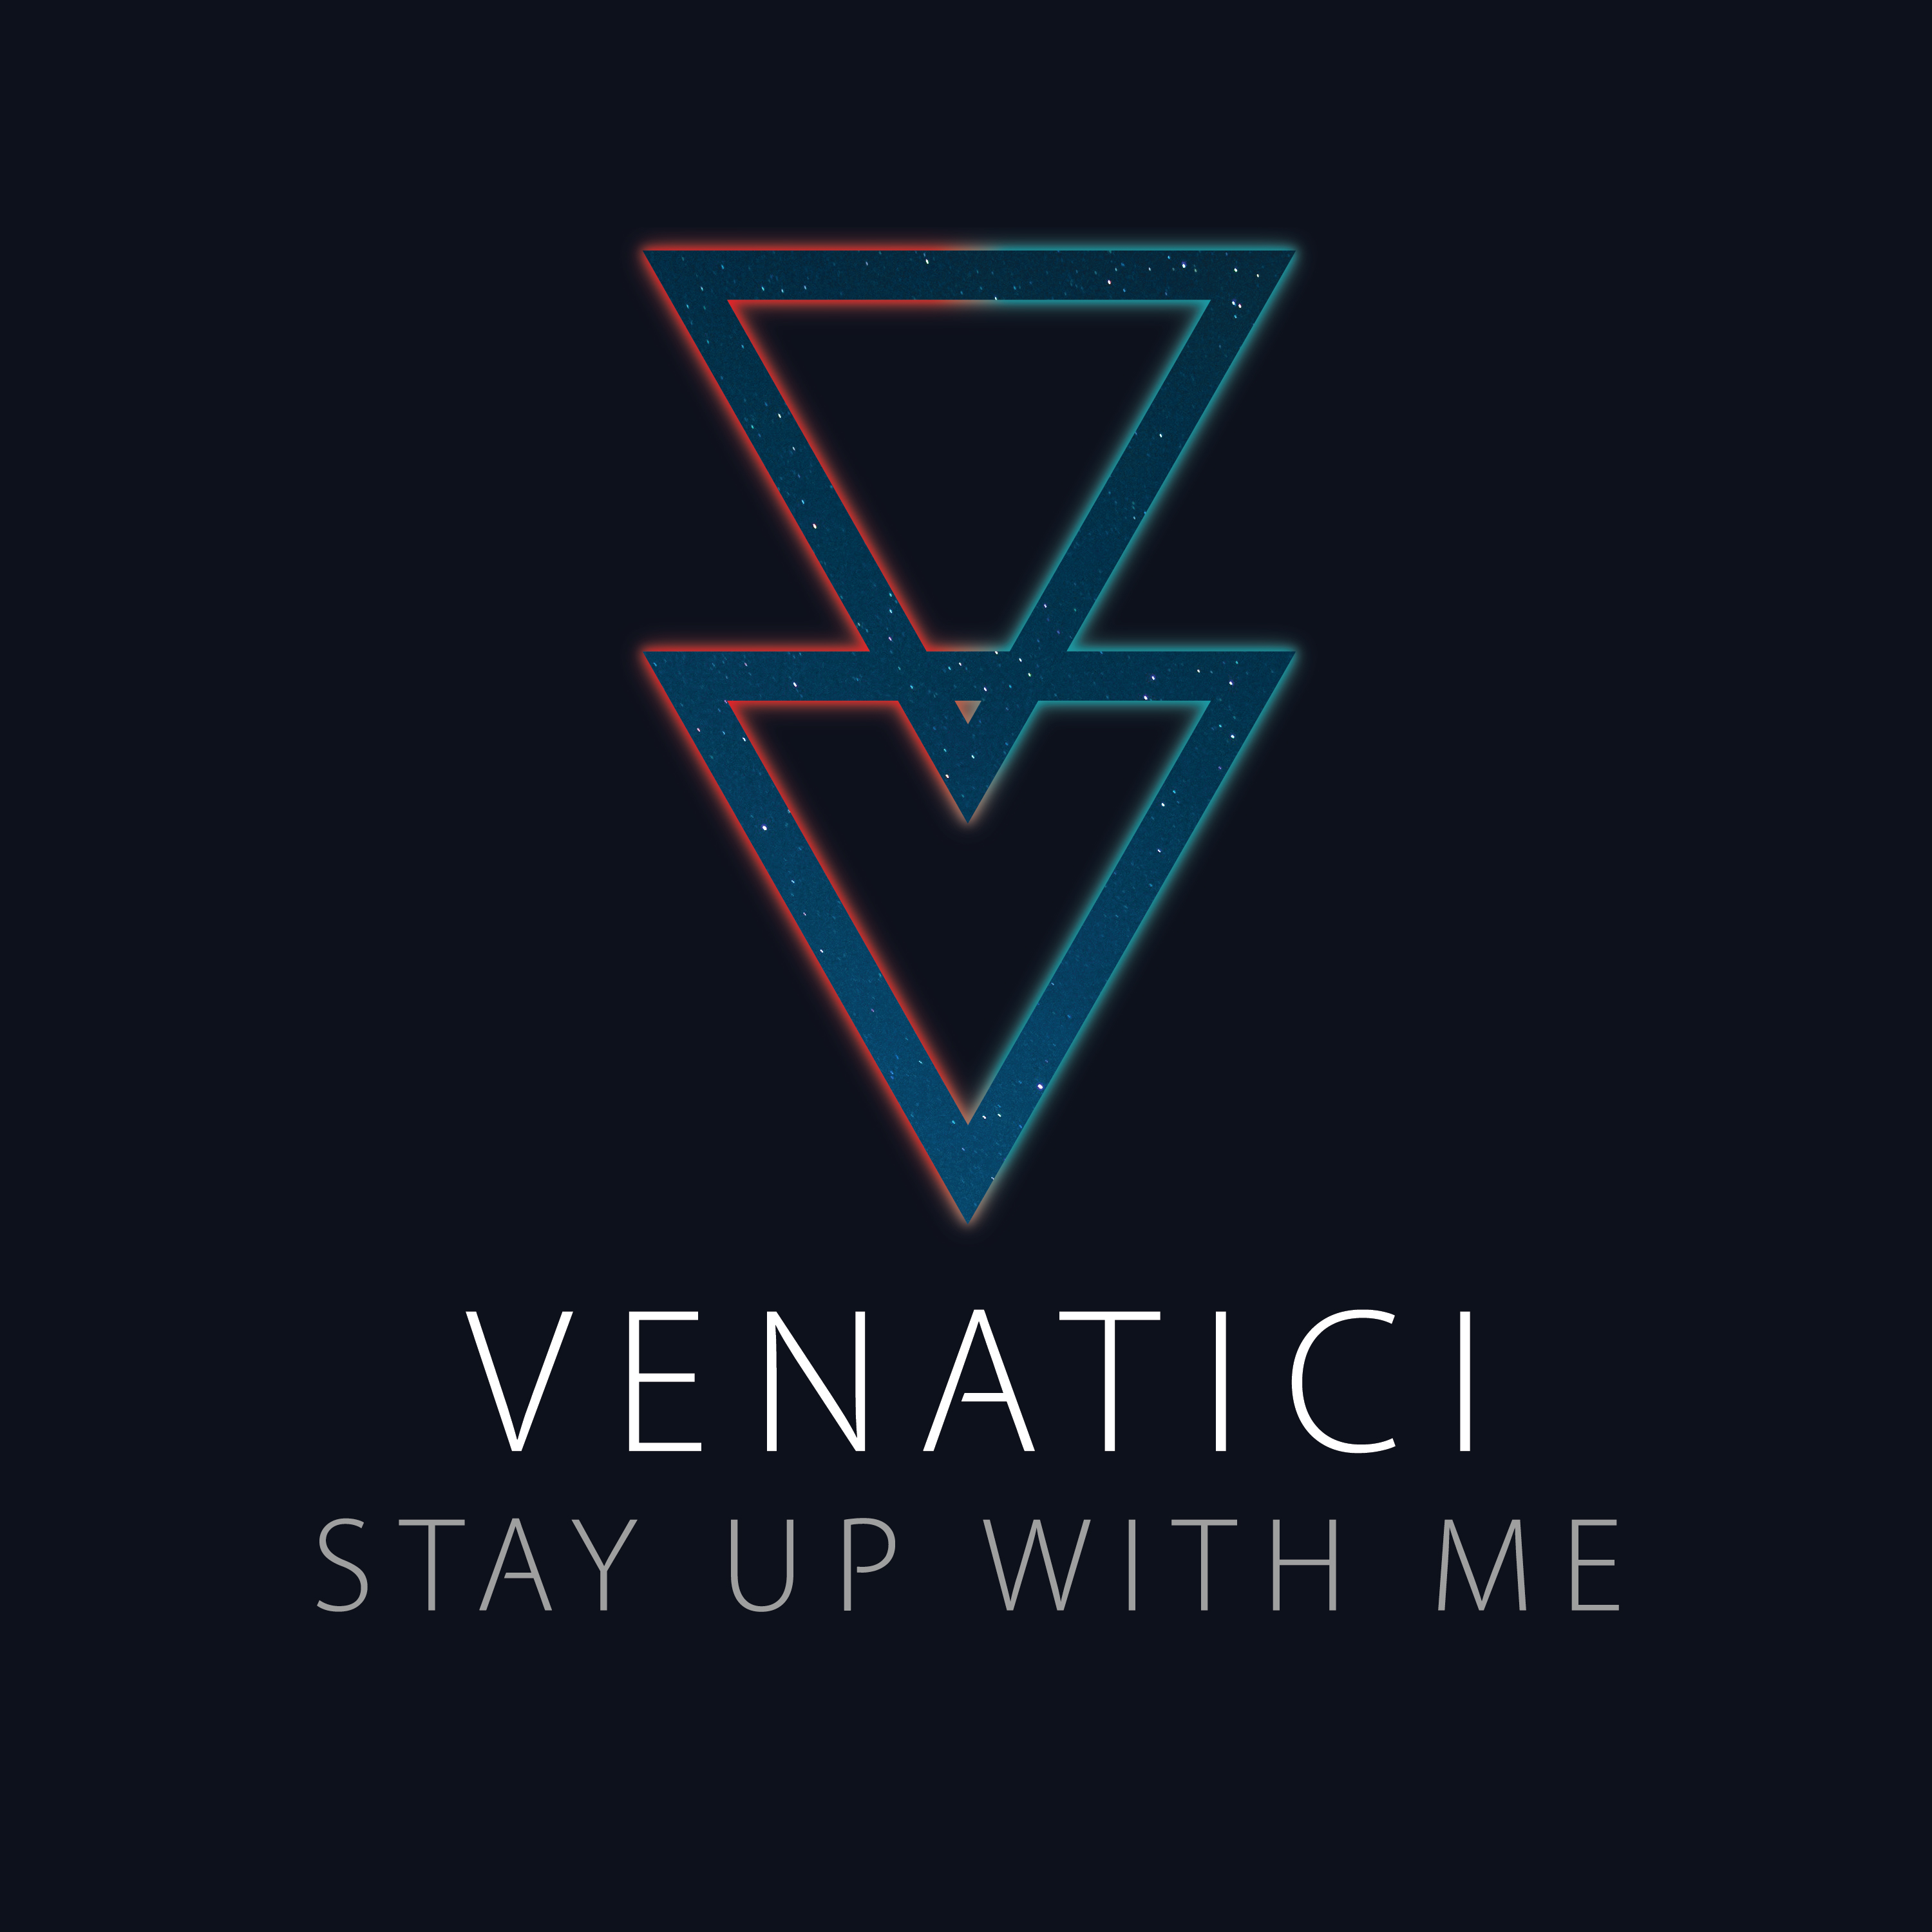 Venatici Stay up with Me Single Artwork